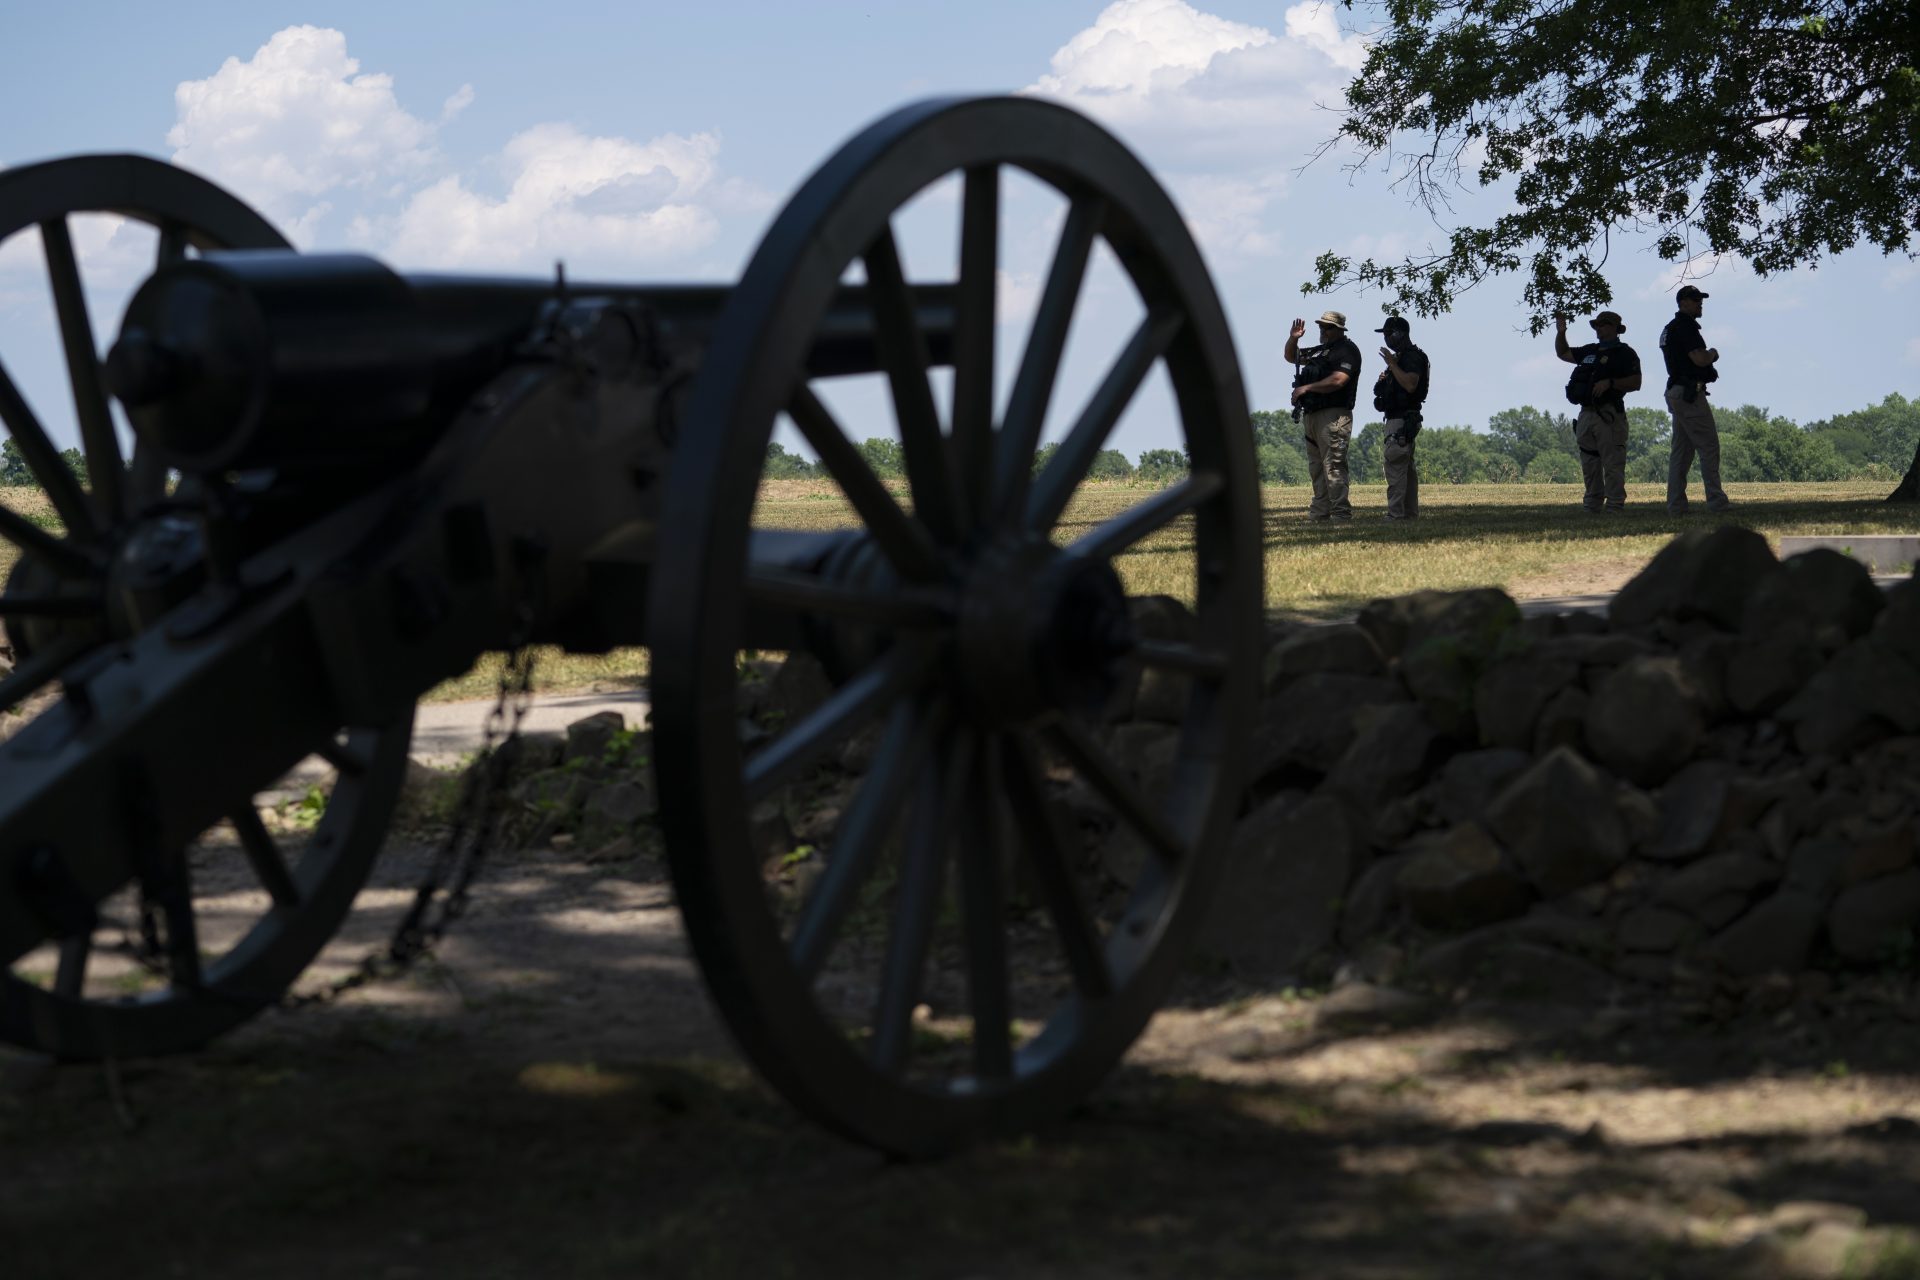 Members of a Department of Homeland Security police force stand guard at the North Carolina monument in the Gettysburg National Military Park Saturday, July 4, 2020 in Gettysburg,.